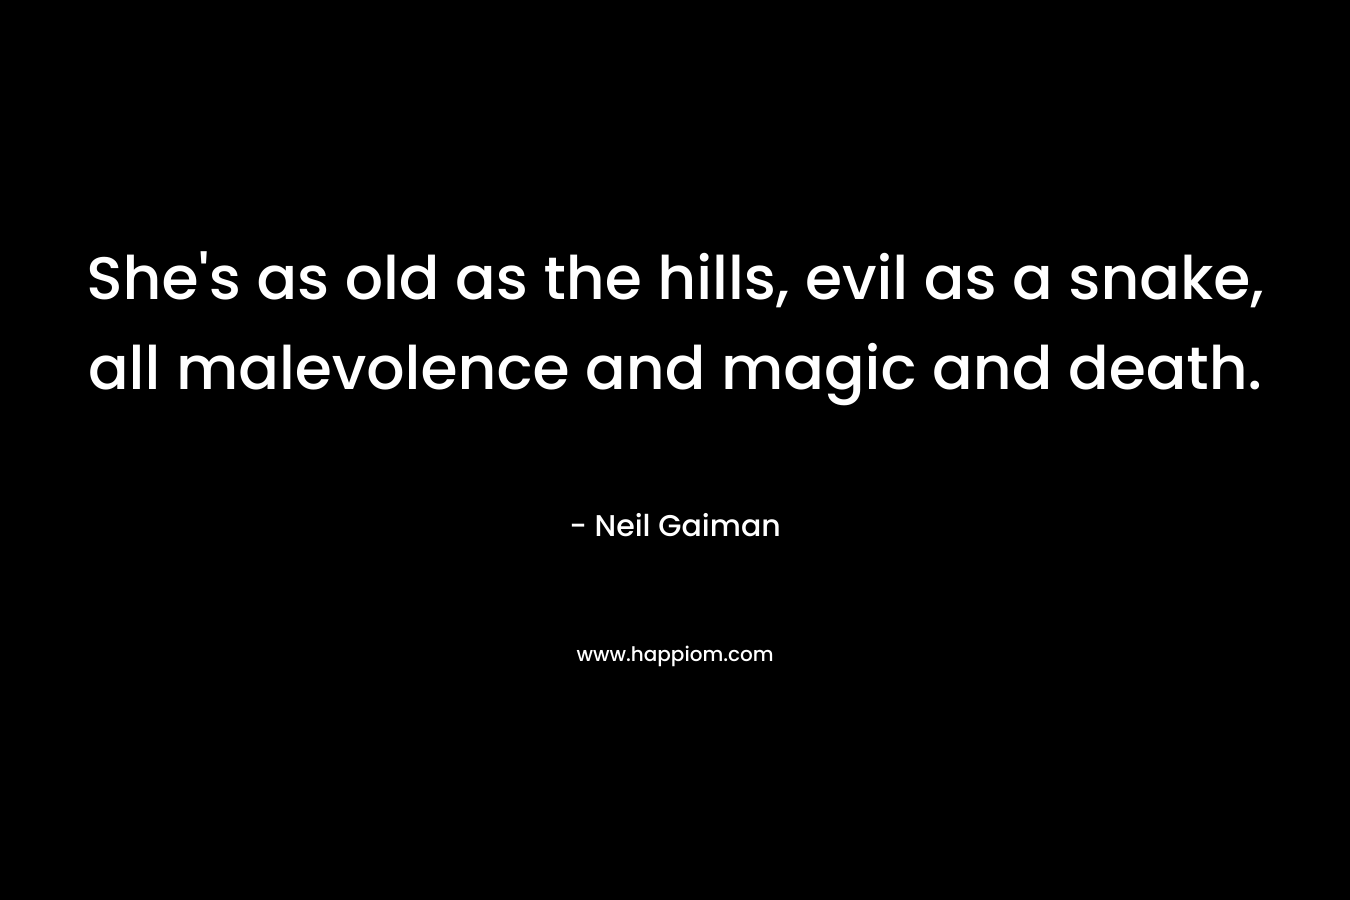 She’s as old as the hills, evil as a snake, all malevolence and magic and death. – Neil Gaiman